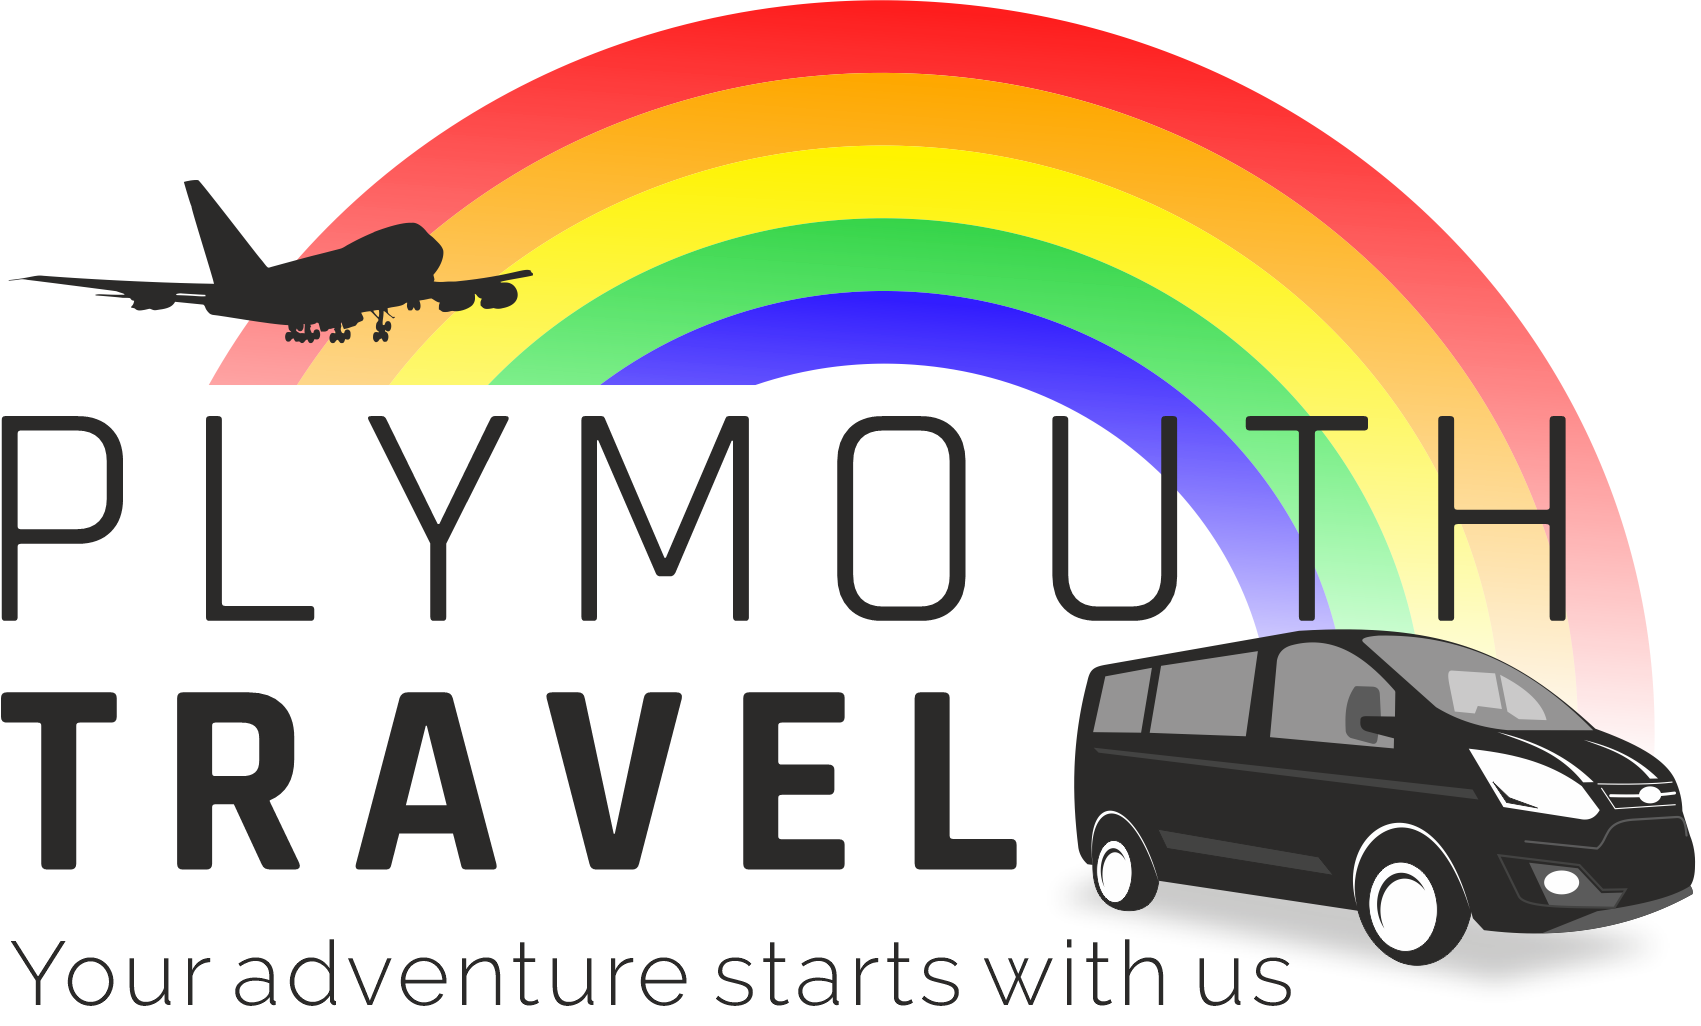 PLYMOUTH TRAVEL